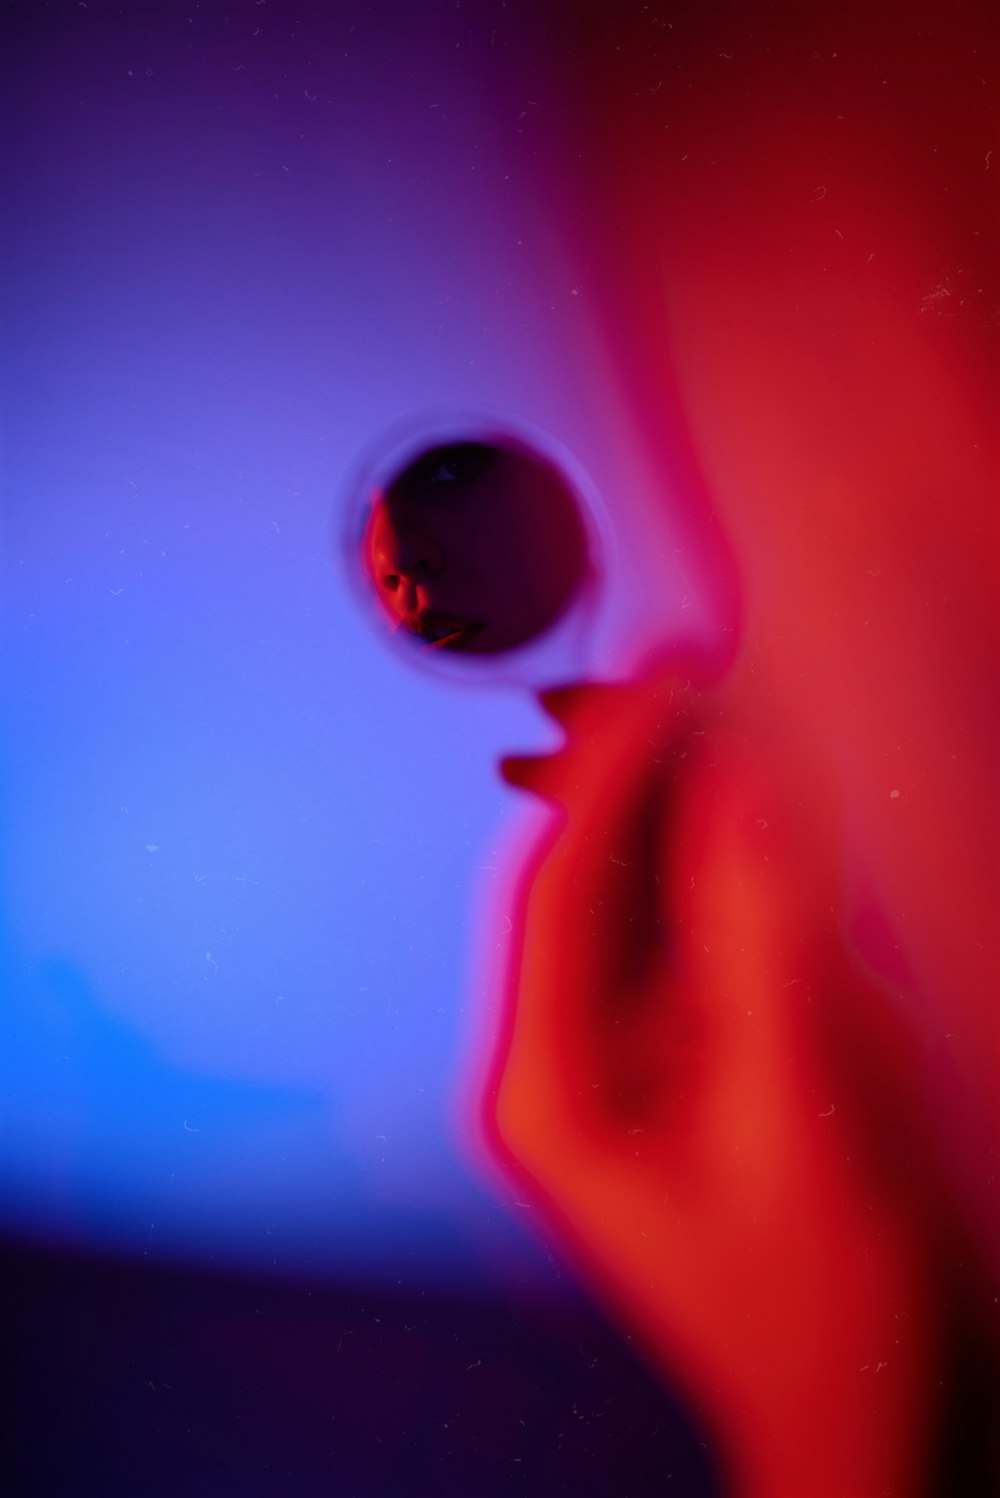 a blurry image of a person's face with a red and blue background